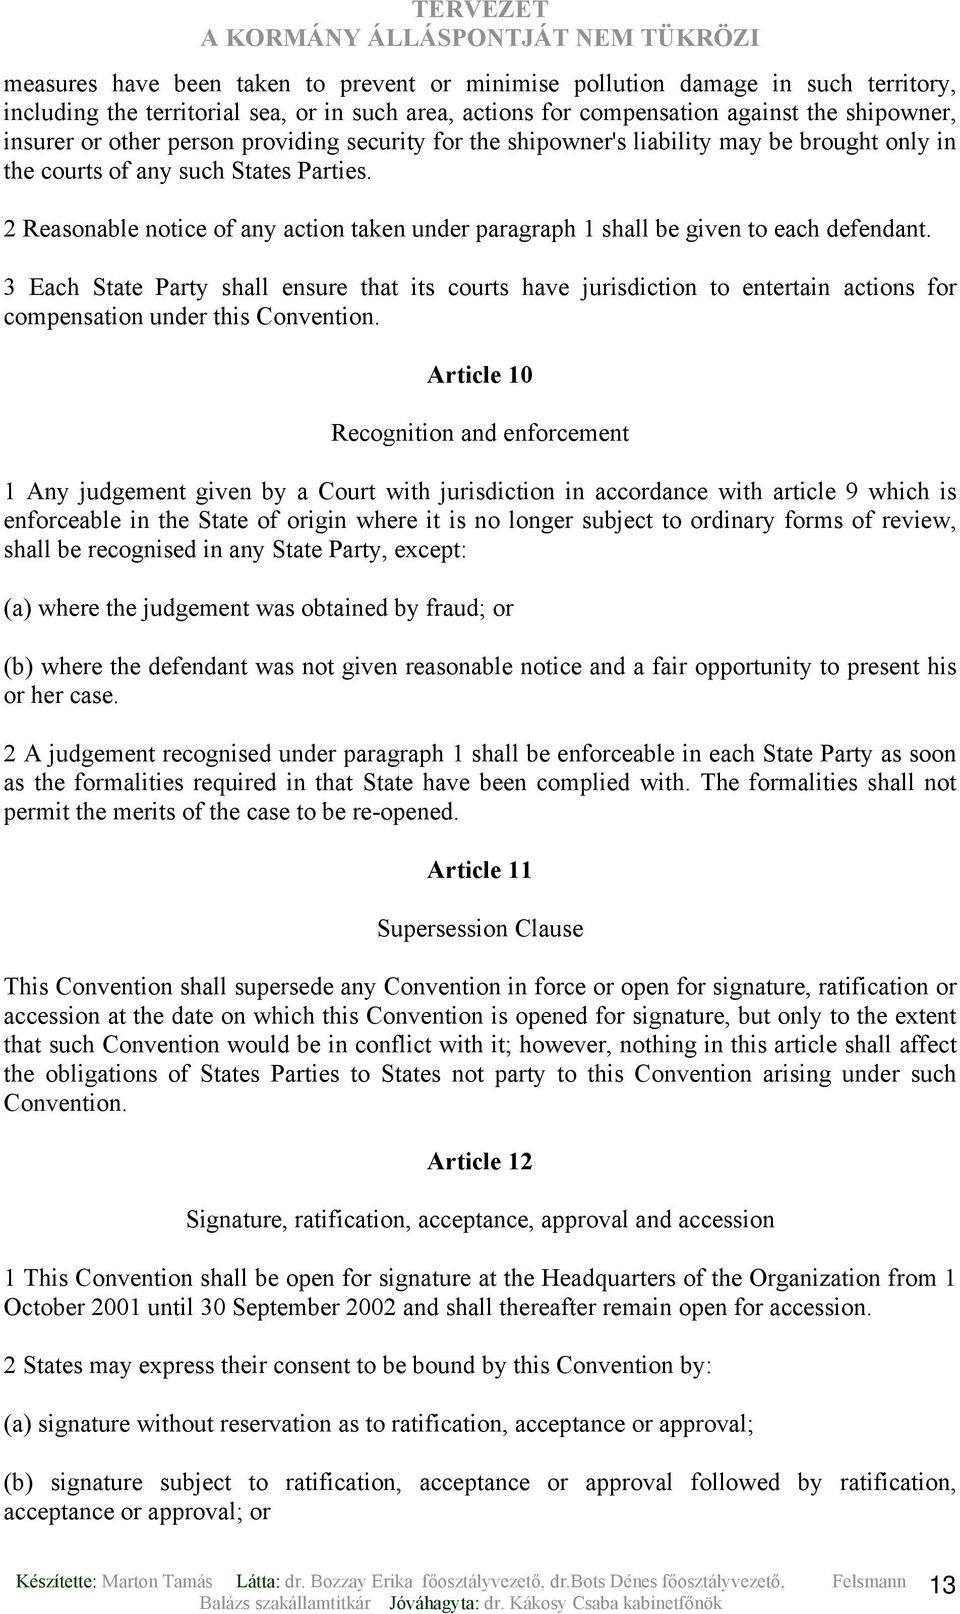 2 Reasonable notice of any action taken under paragraph 1 shall be given to each defendant.